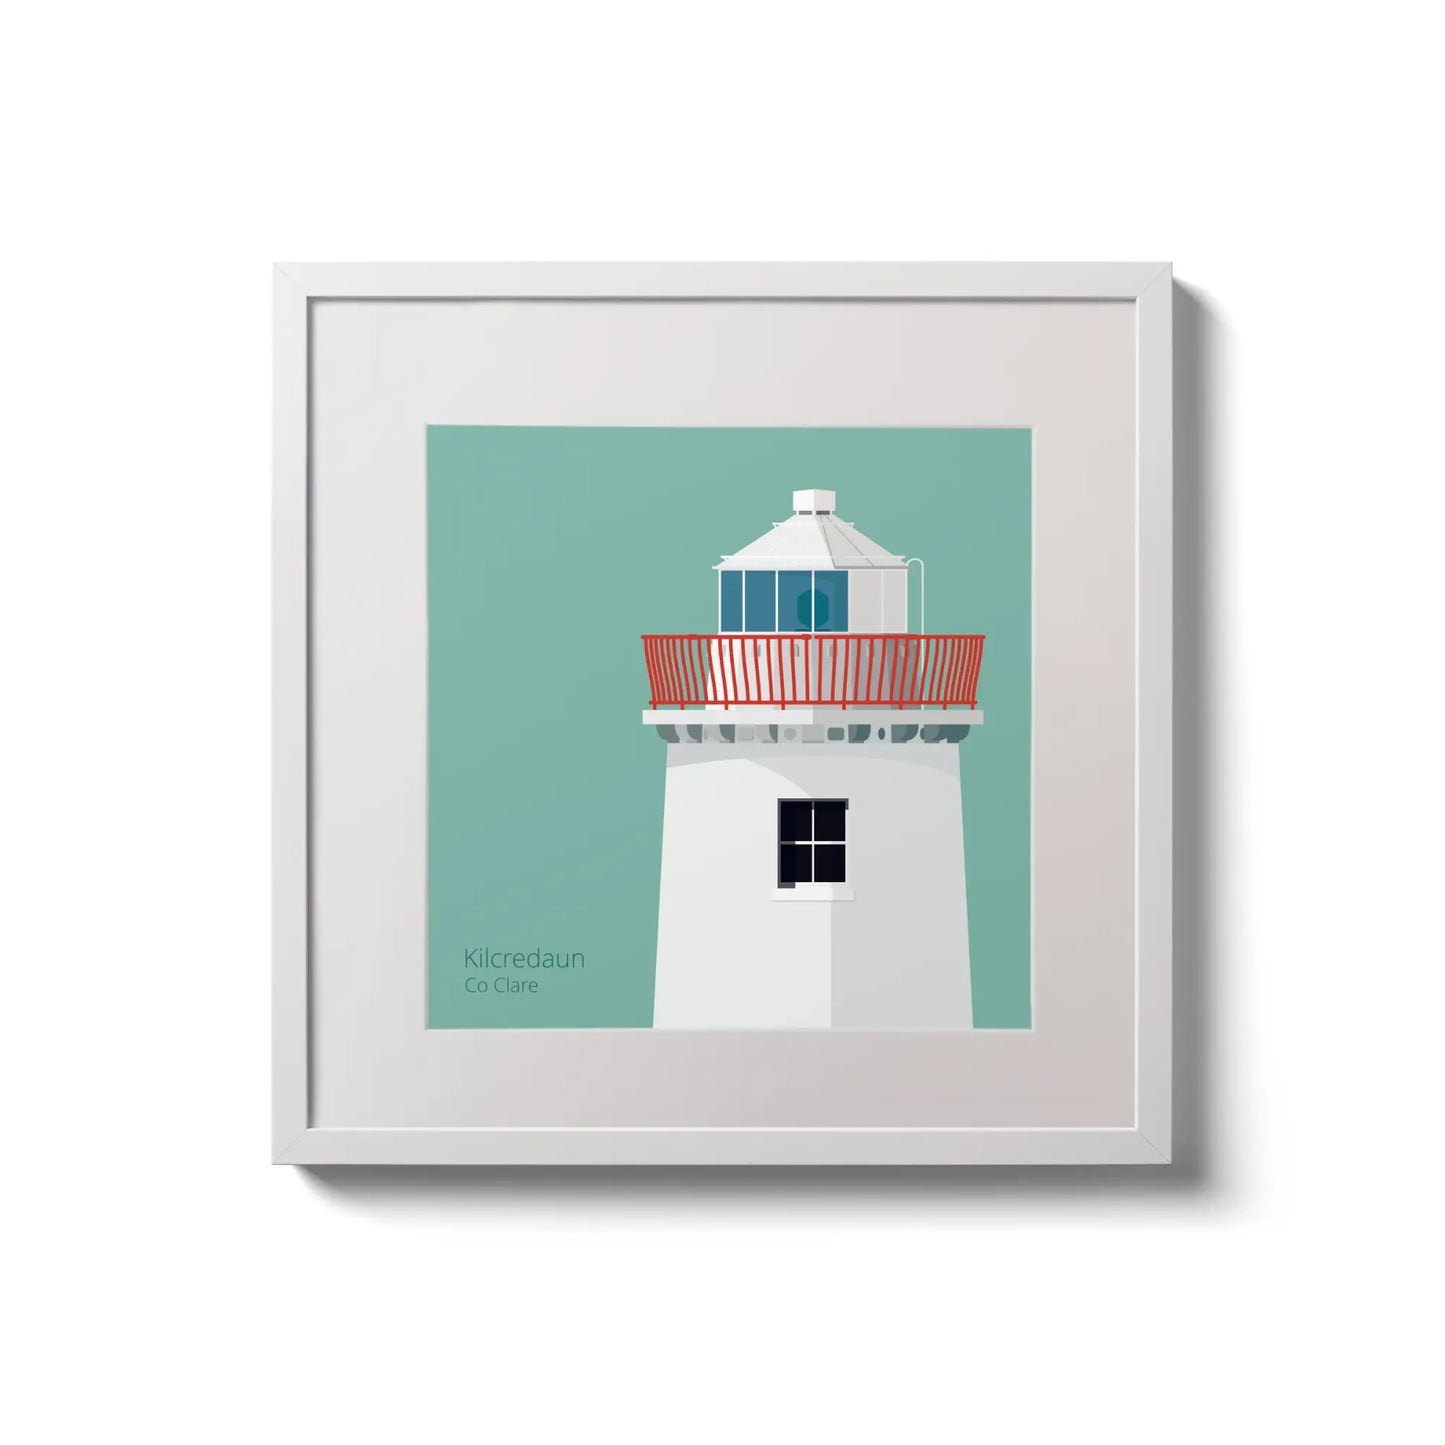 Illustration of Kilcredaun lighthouse on an ocean green background,  in a white square frame measuring 20x20cm.